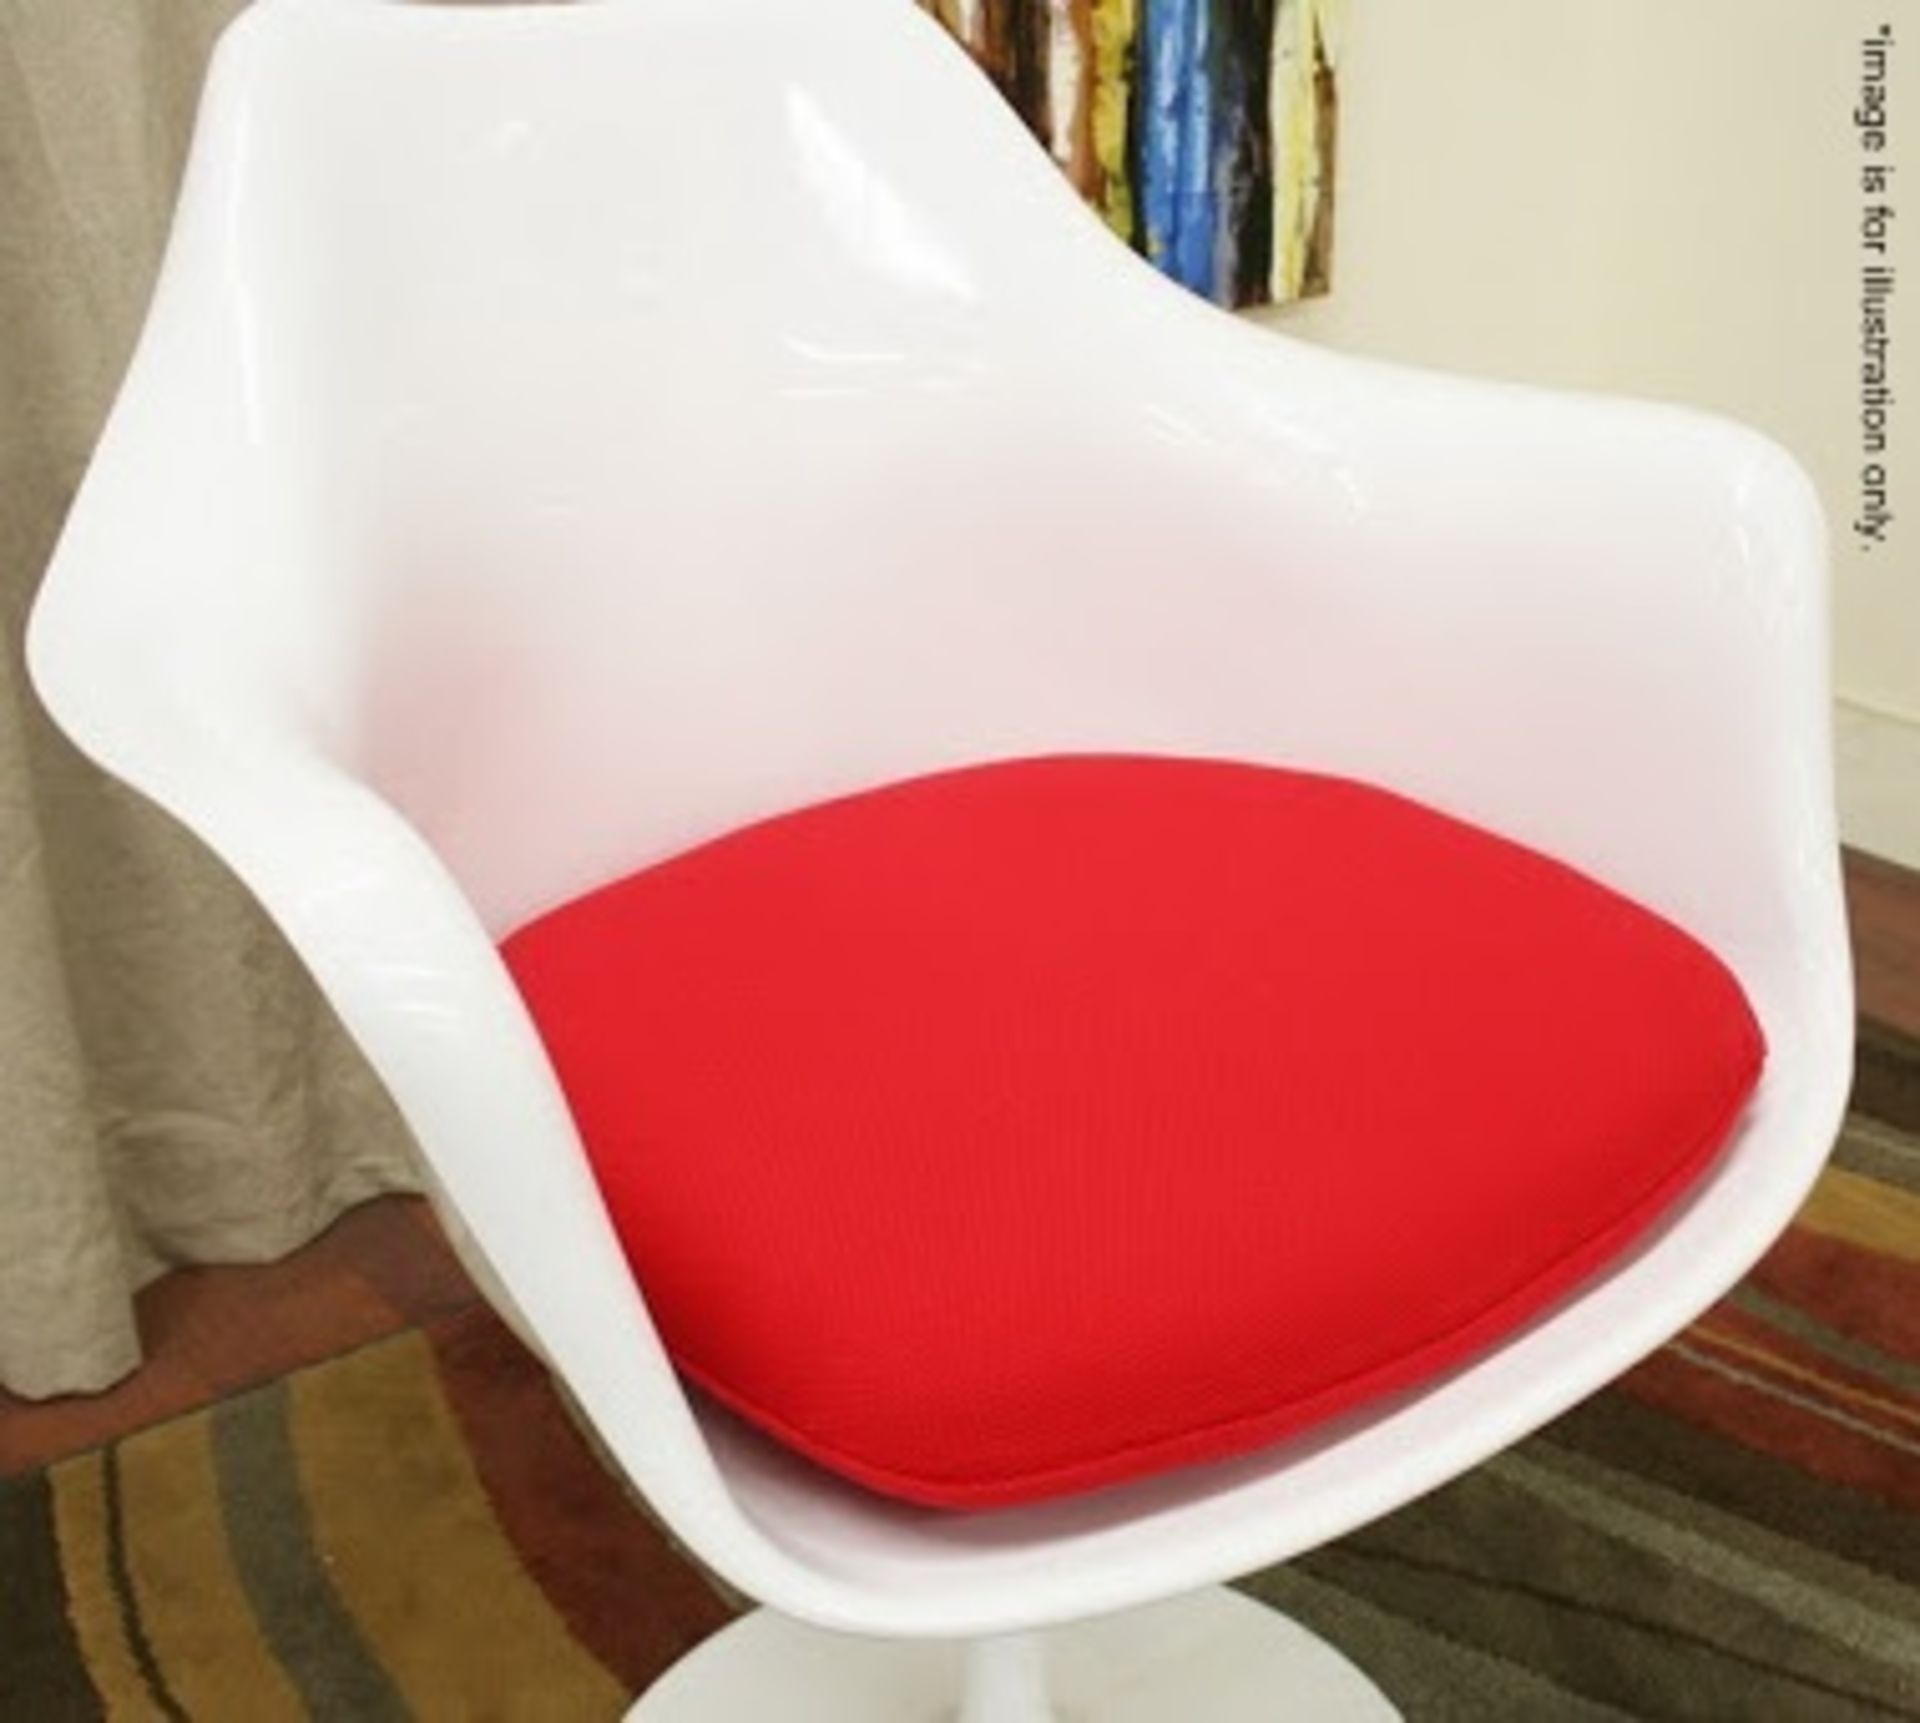 1 x Eero Saarinen Inspired Tulip Armchair In White With Red Fabric Cushion - Brand New Boxed Stock - - Image 2 of 3